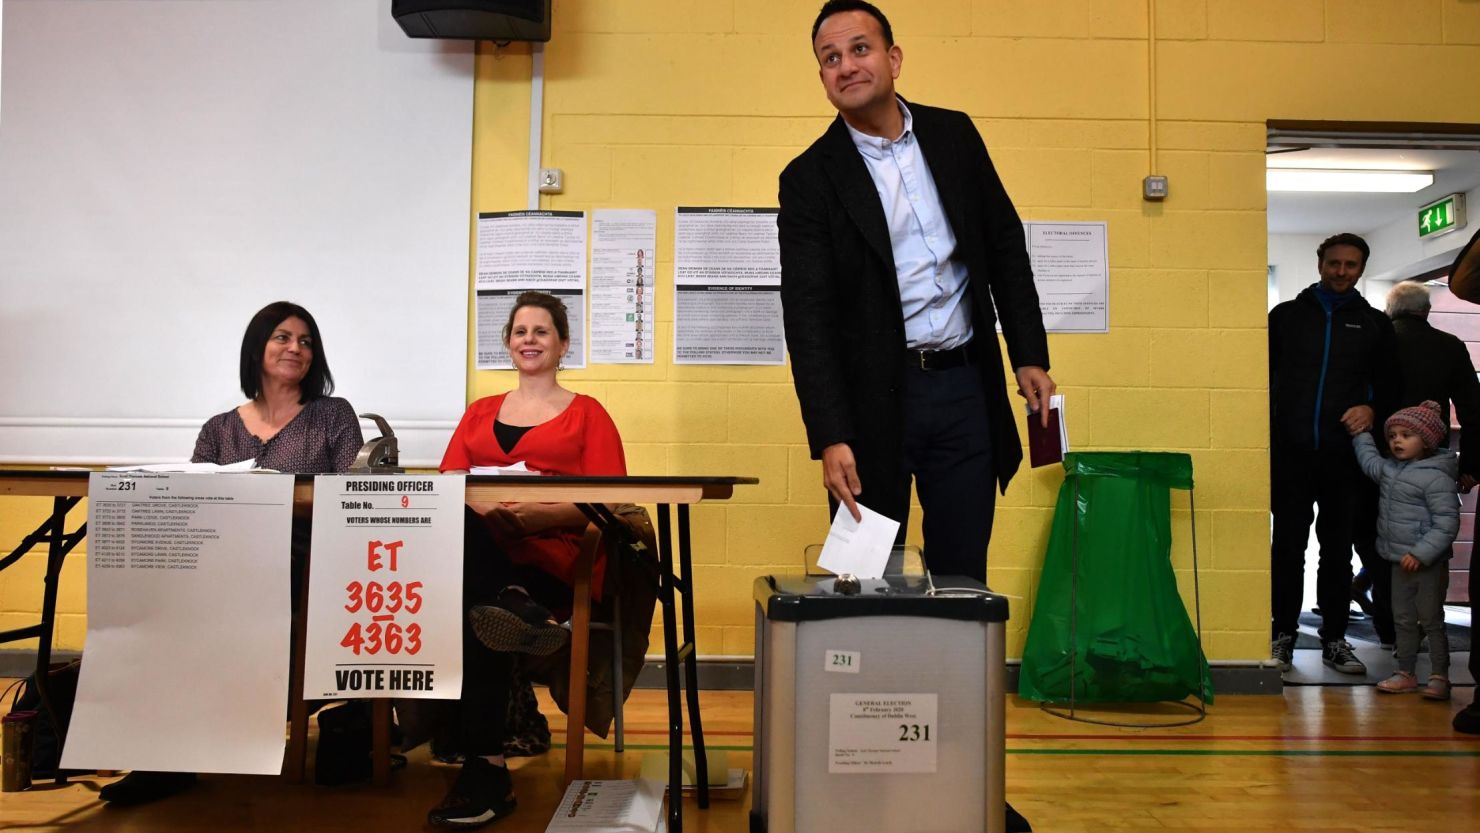 Ireland's Taoiseach, or Prime Minister, Leo Varadkar casts his vote at a polling station in Castleknock, Dublin, on Saturday.